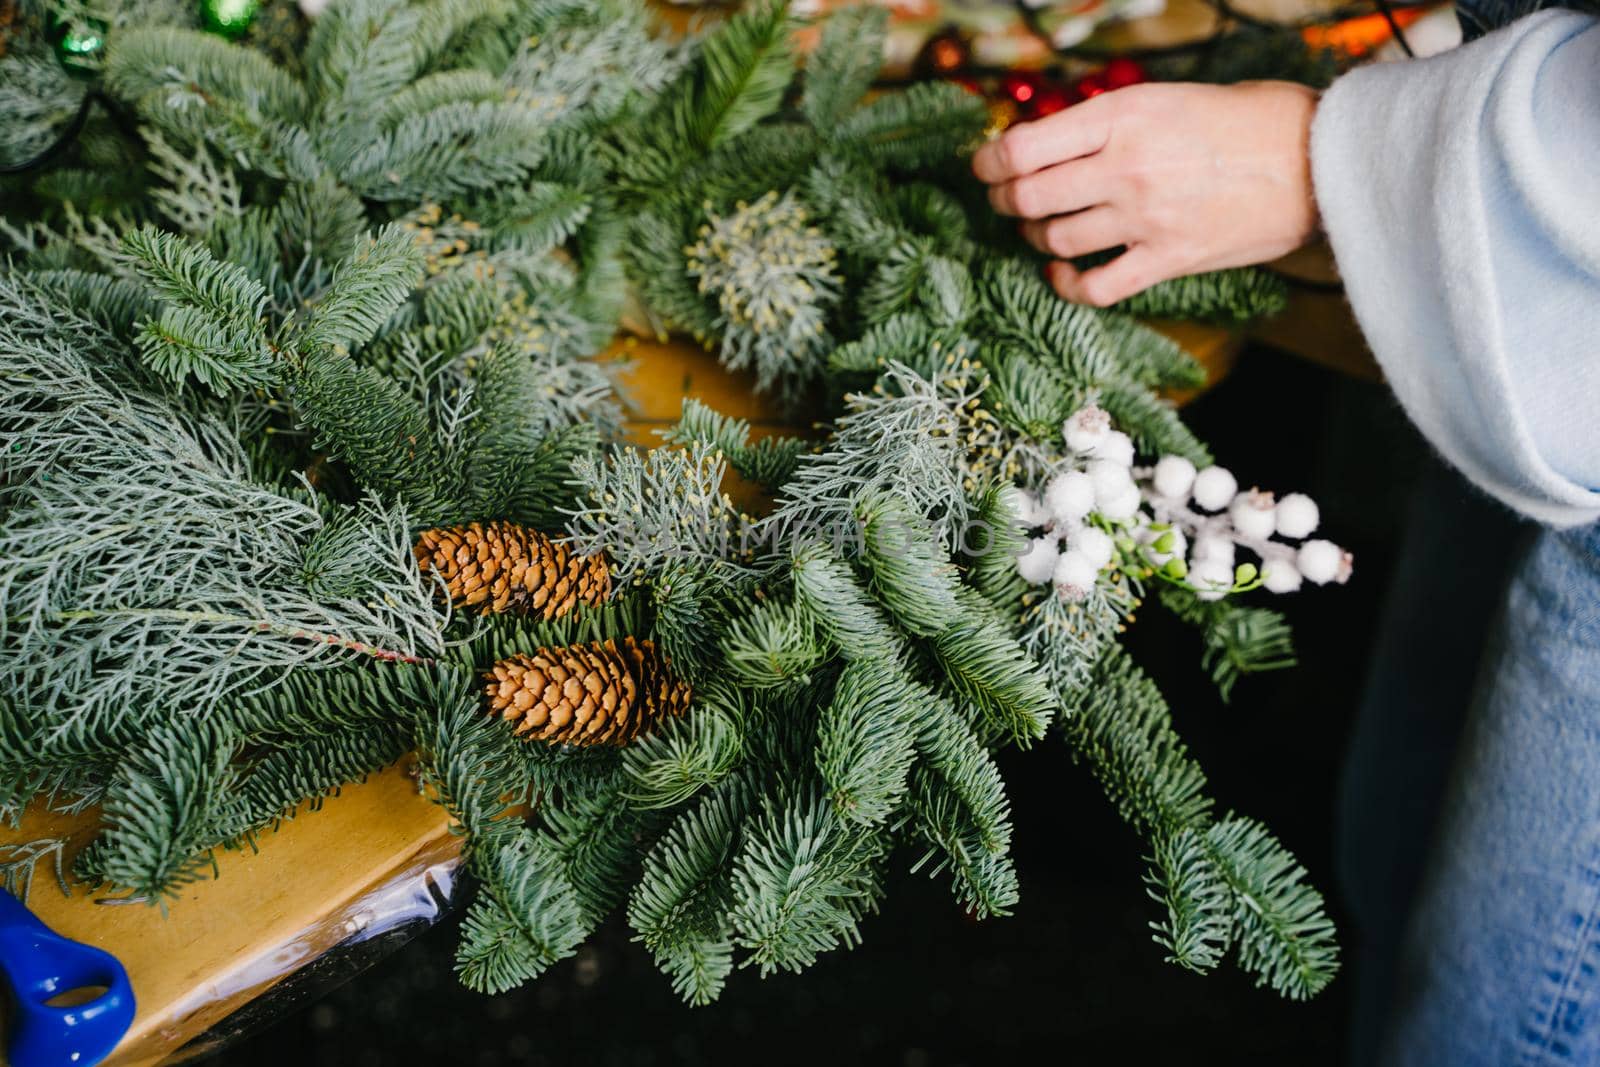 Concept of florist's work before christmas holidays. Creating a Christmas wreath of spruce branches and a cardboard frame. A wreath of coniferous branches with your own hands.